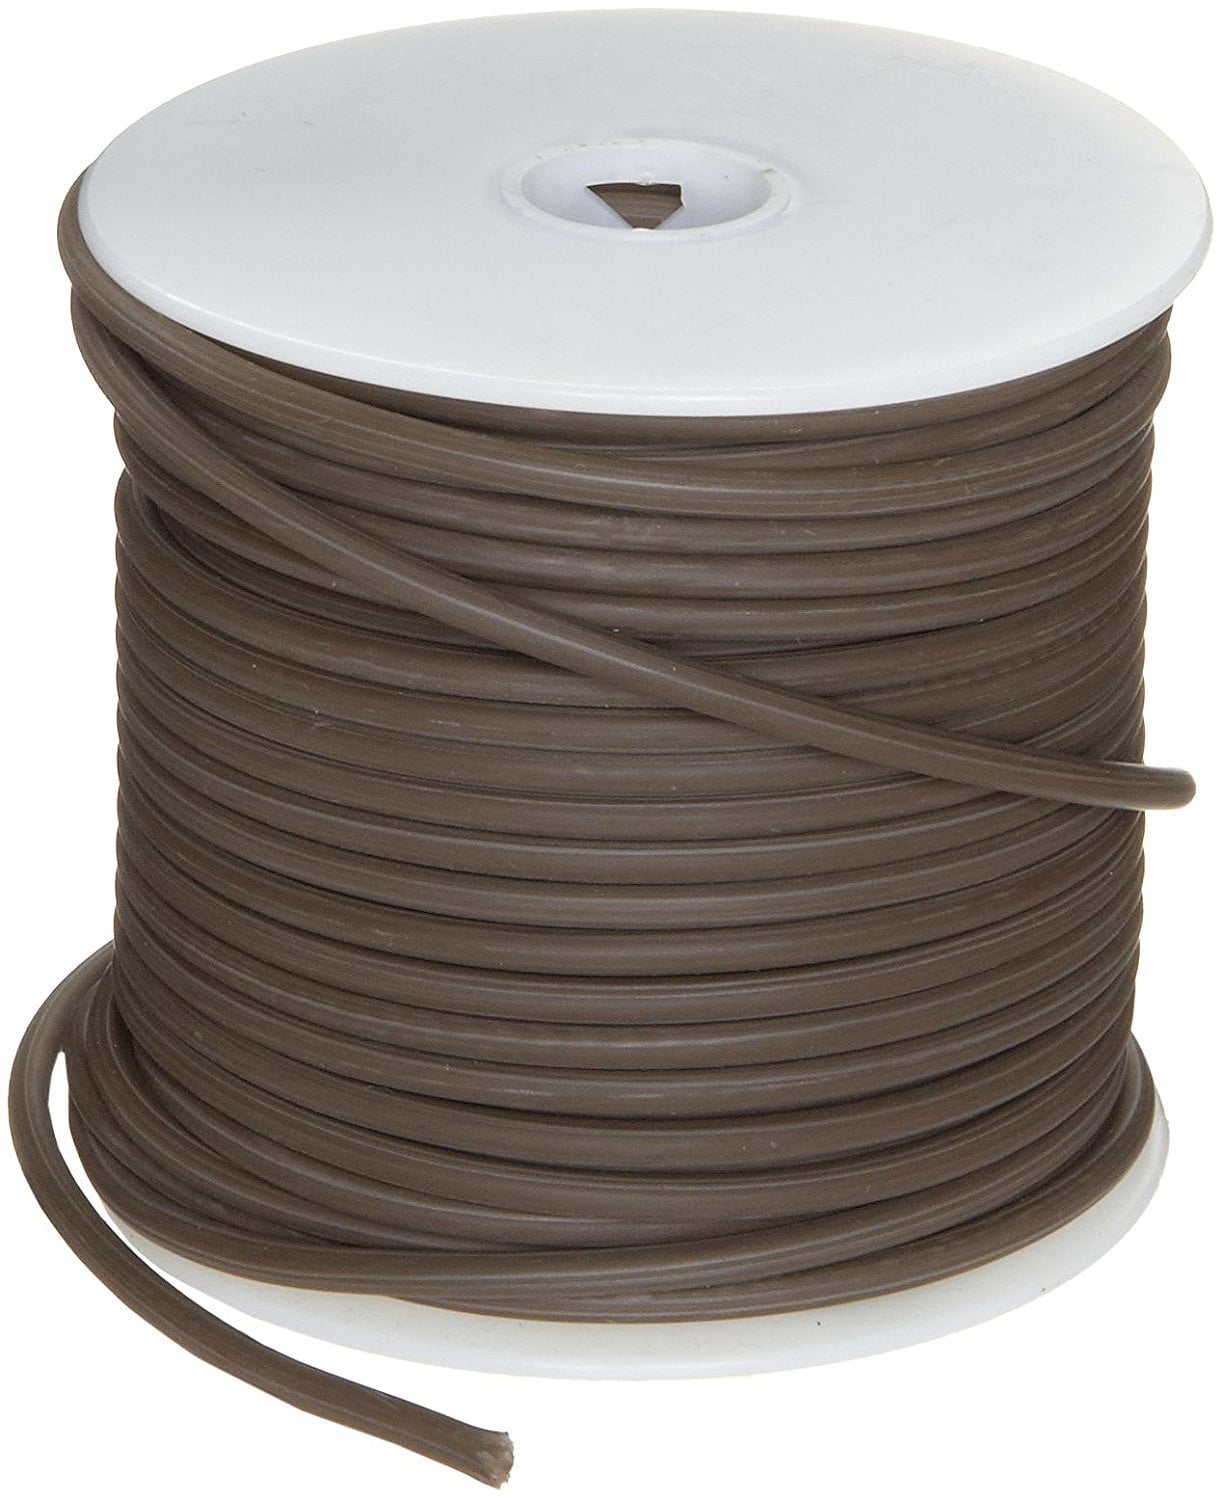 18 AWG 0.040 Diameter 1000' Length GXL Automotive Copper Wire Pack of 1 Pack of 1 Violet 0.040 Diameter 1000 Length Small Parts 